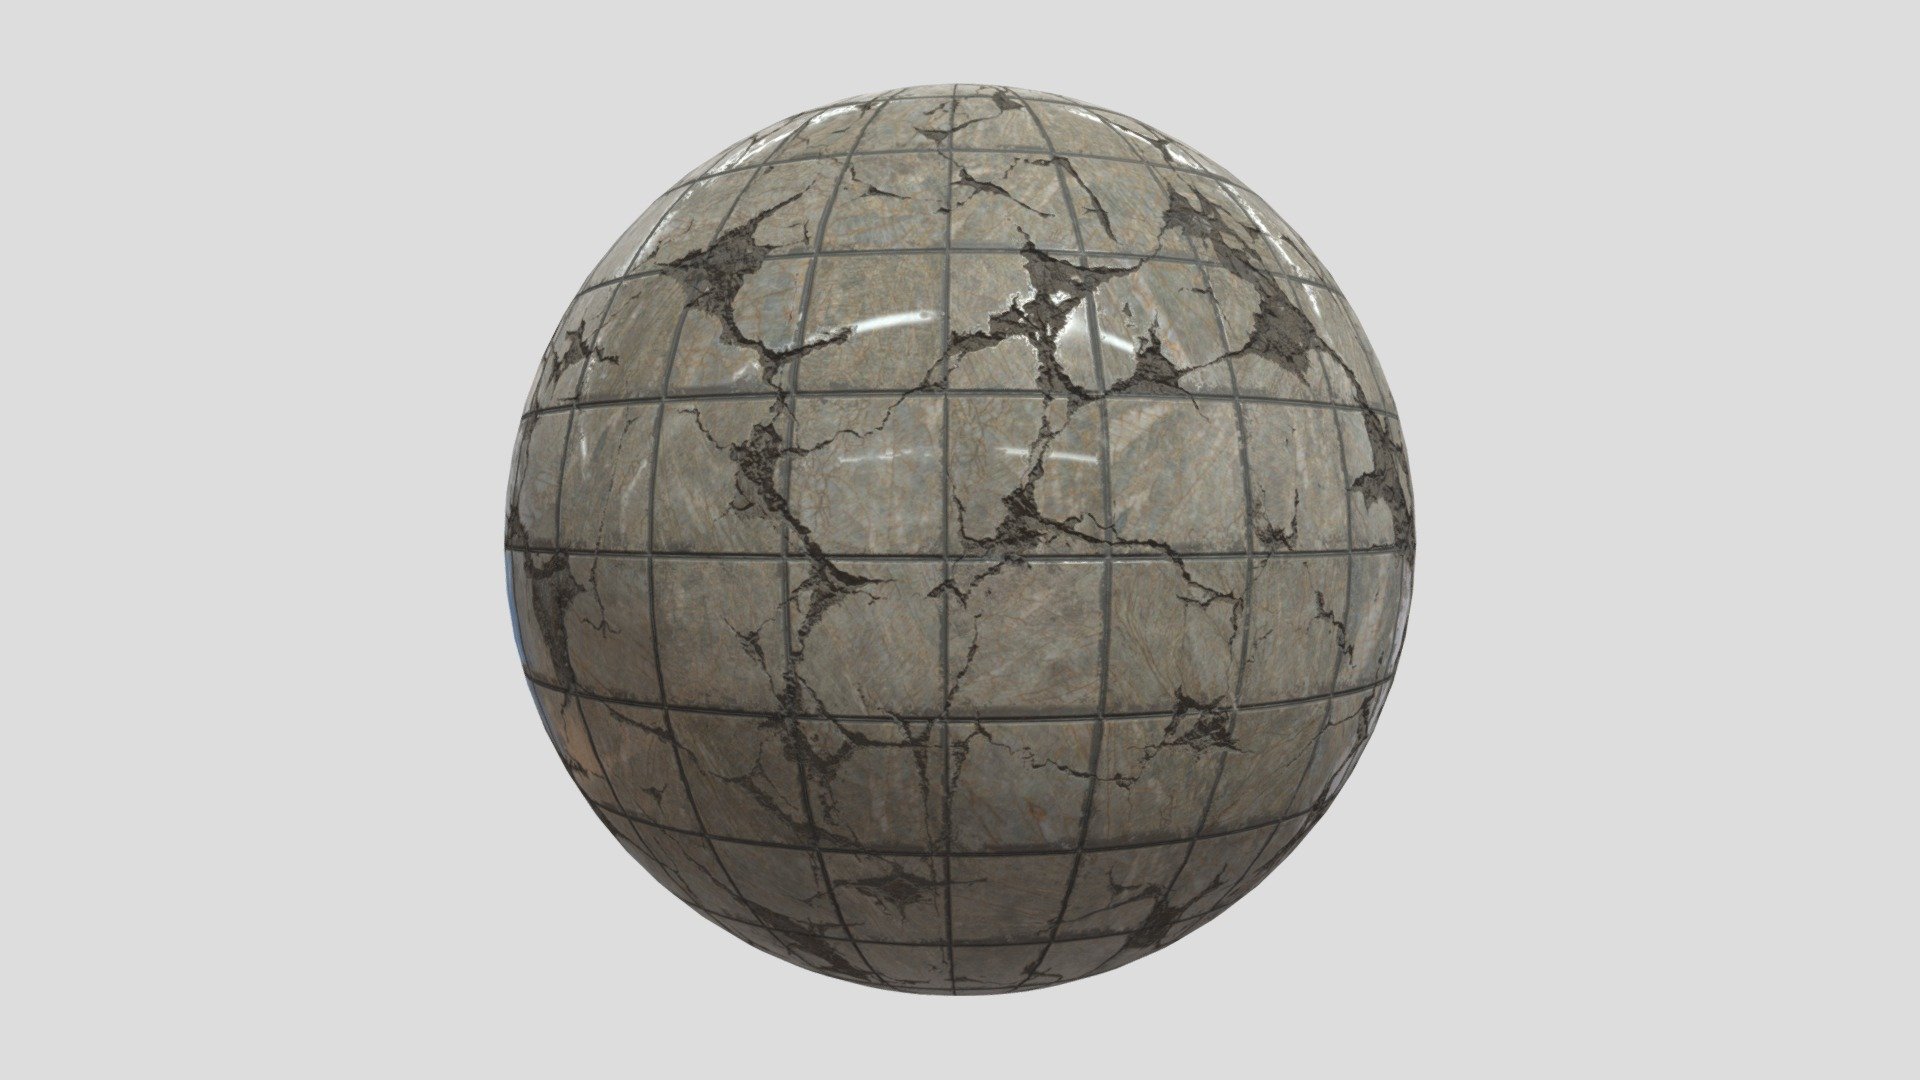 *Features:


PBR Both Standards (Metal/Rough &amp; Spec/Gloss)
4K Resolution (4096 x 4096 px)
Seamless (Tileable Both Direction)
Square Dimension
AAA Quality
Metal/Rough Types have 7 Channel Maps for each type (Base Color, AO, Metallic, Roughness, Normal, Height, Specular)
Spec/Gloss Version contains 6 Channel Maps for each type (Diffuse, Glossiness, Height, Normal, AO, Specular)
Real-World Scale Size is 100cm x 100cm
You could use it in any 3D Application PBR Render Engine such as V-Ray &amp; Corona, Blender, Cinema 3D &amp; Game Engines
Resources 3D models Materials Manmade 3D Coat 3ds Max After Effects Arnold Blender Cinema 4D Clip Paint DAZ Studio Illustrator Keyshot Manga Studio Mari Marmoset Marvelous Designer Maya MentalRay Modo Mudbox Nuke Corel Painter Photoshop Quixel Suite Substance Designer Substance Painter Unity Unreal Engine V-Ray ZBrush Houdini ClarisseiFX Photoshop CC Photoshop Affinity Photo Infinite Painter Rhino Revit SketchUp CGI PBR AR VR Game Ready AAA

Best Regards DATEC Studio - Tile Floor 003 V5 Cracked - Buy Royalty Free 3D model by DATEC_Studio 3d model